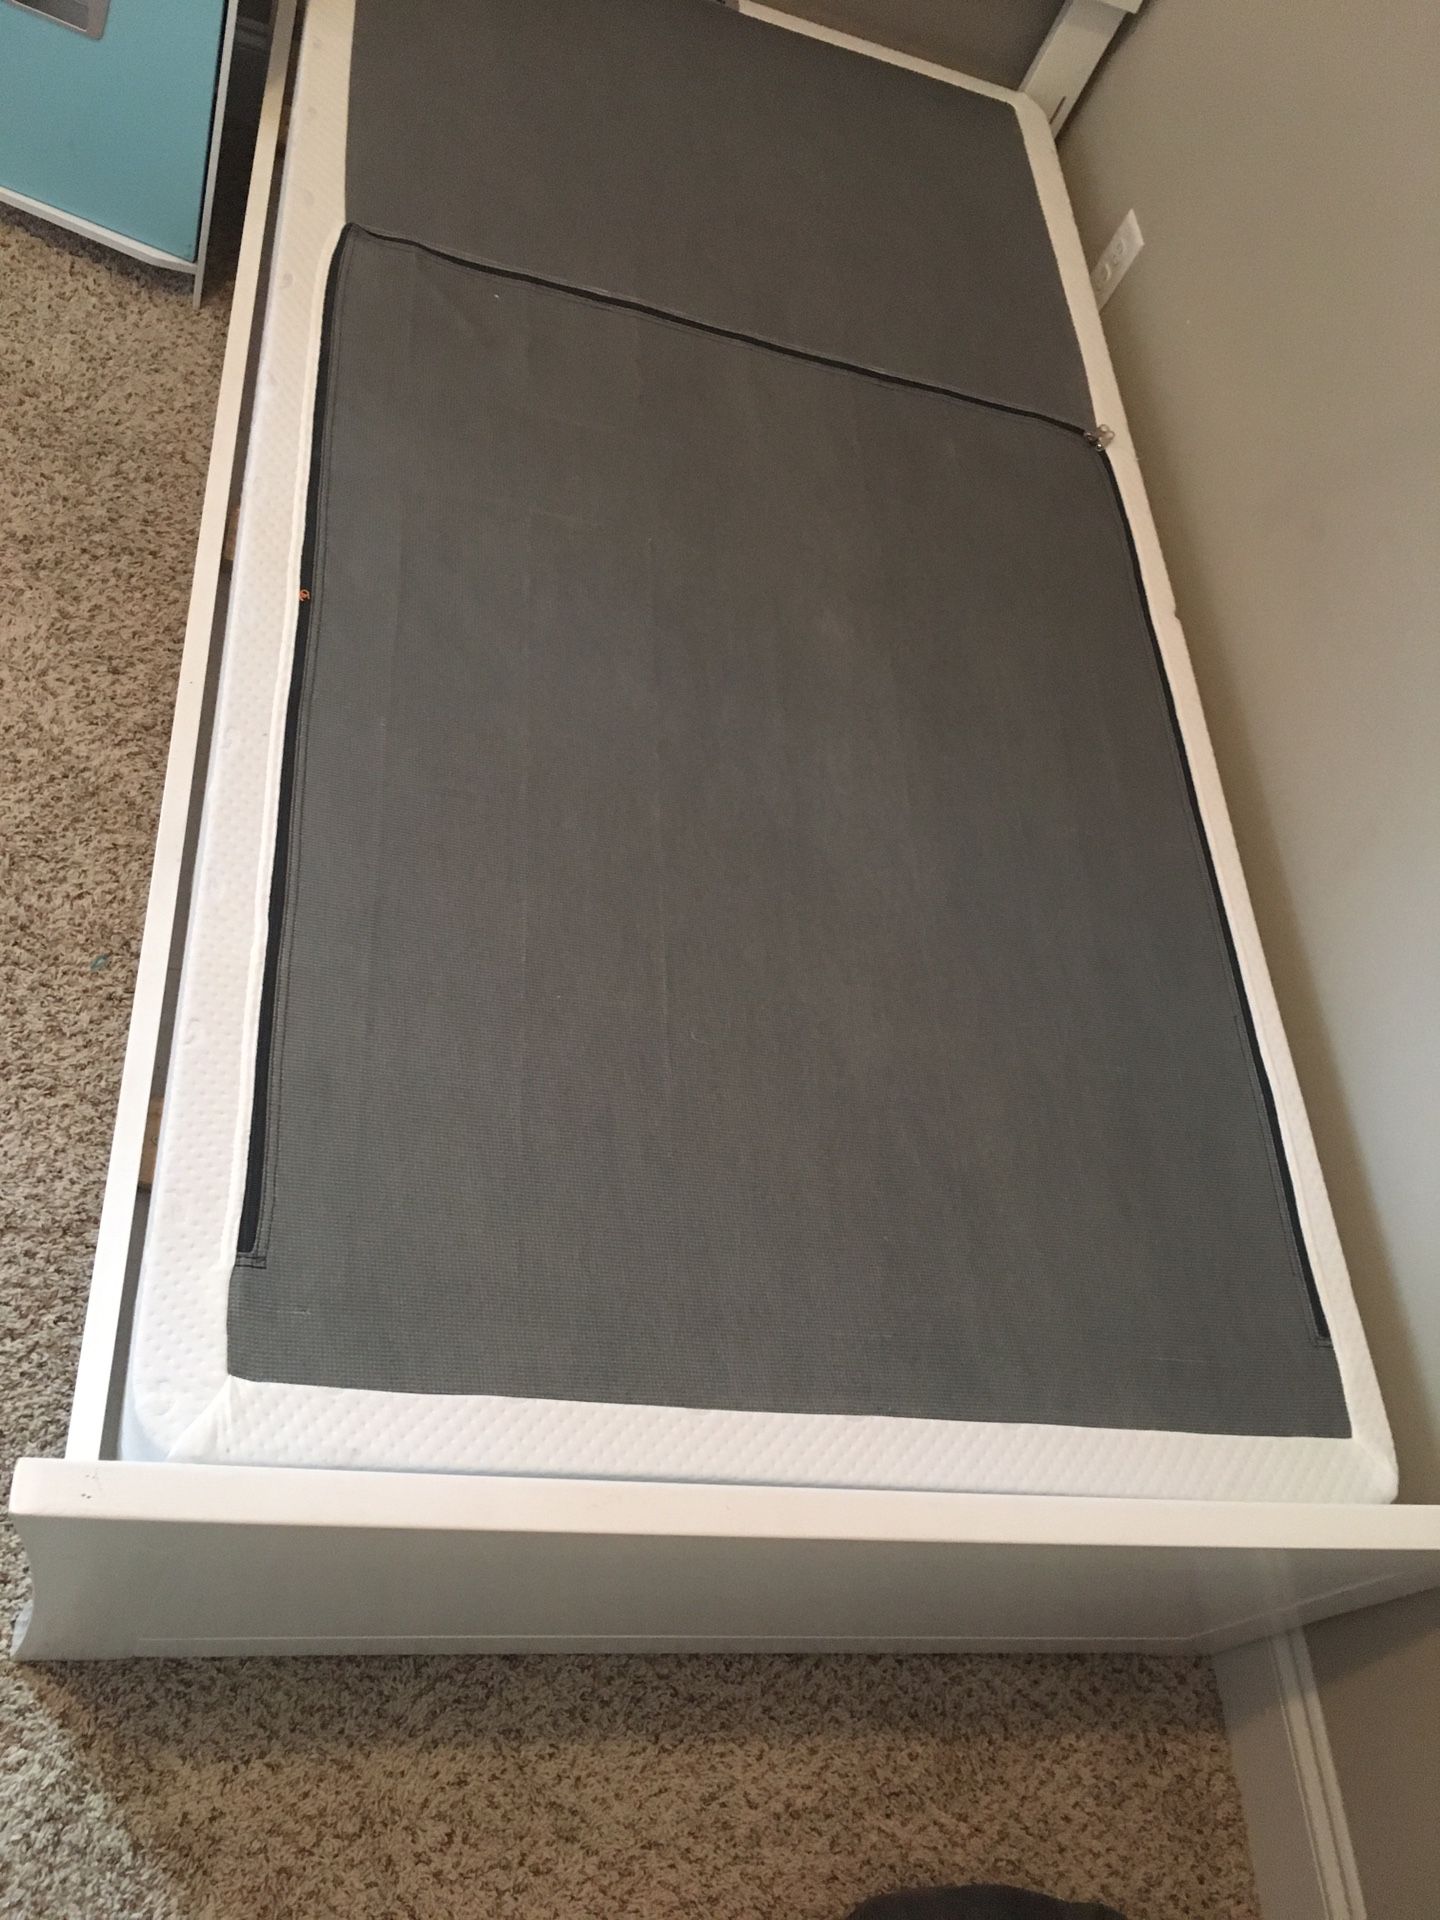 Twin toddler bed frame